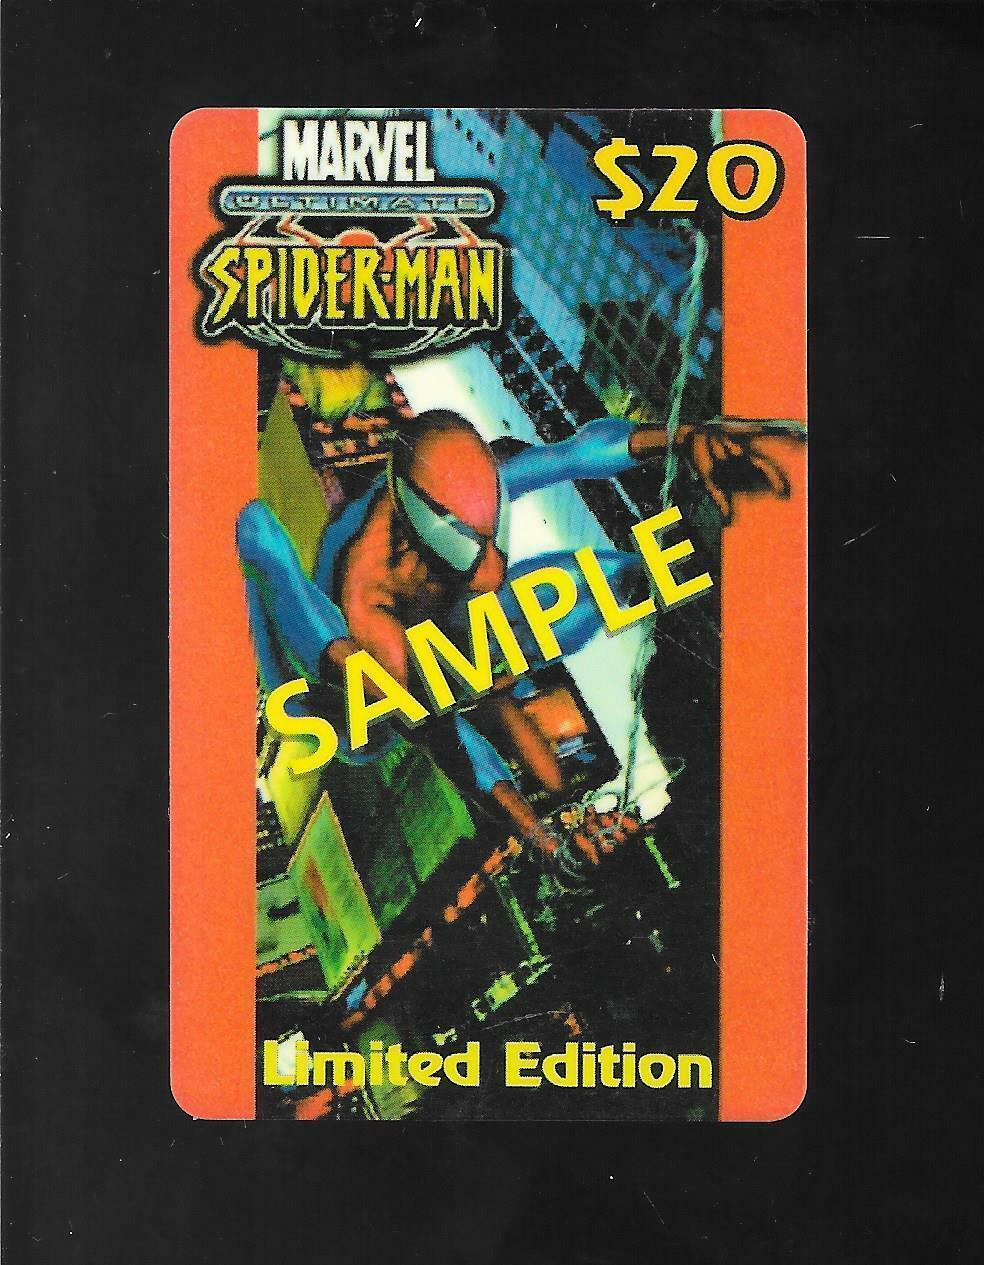 Ultimate Spider-Man Phone Card Limited Edition CallingCards 2002 SAMPLE expired